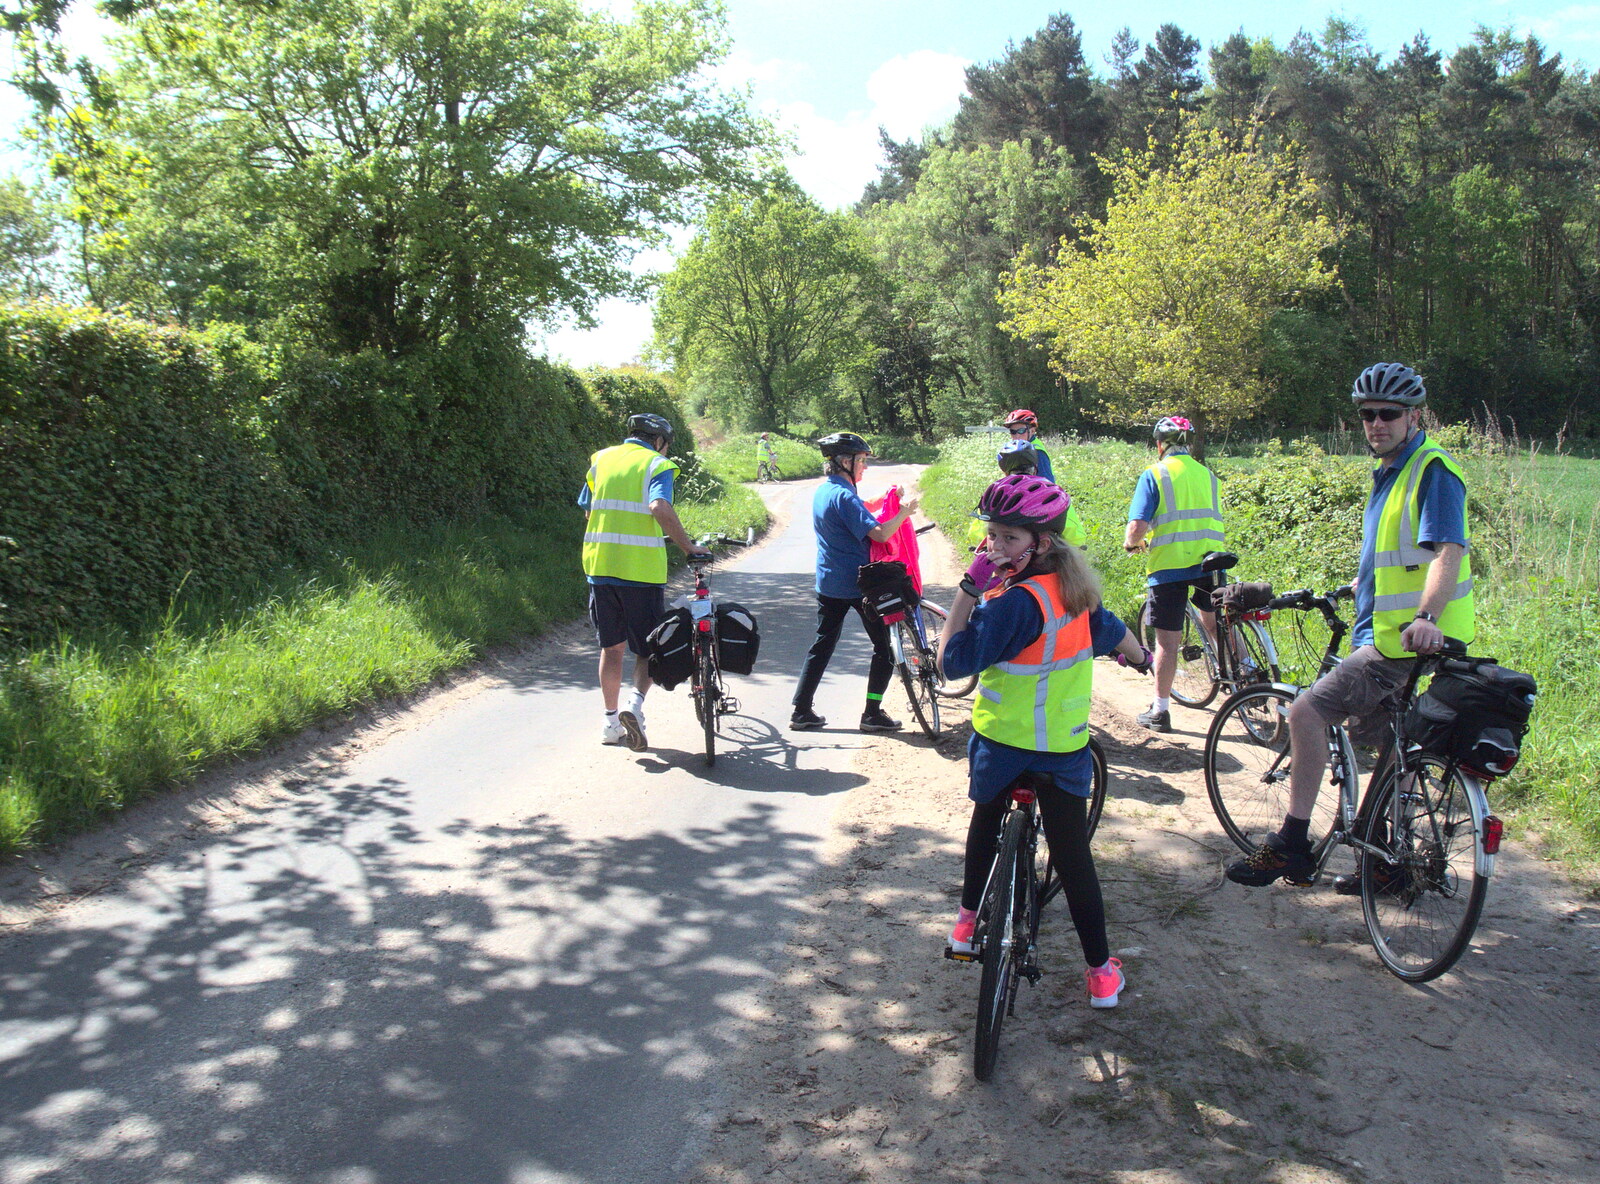 Another pause to check for directions from The BSCC Weekend Away, Holt, Norfolk - 12th May 2018